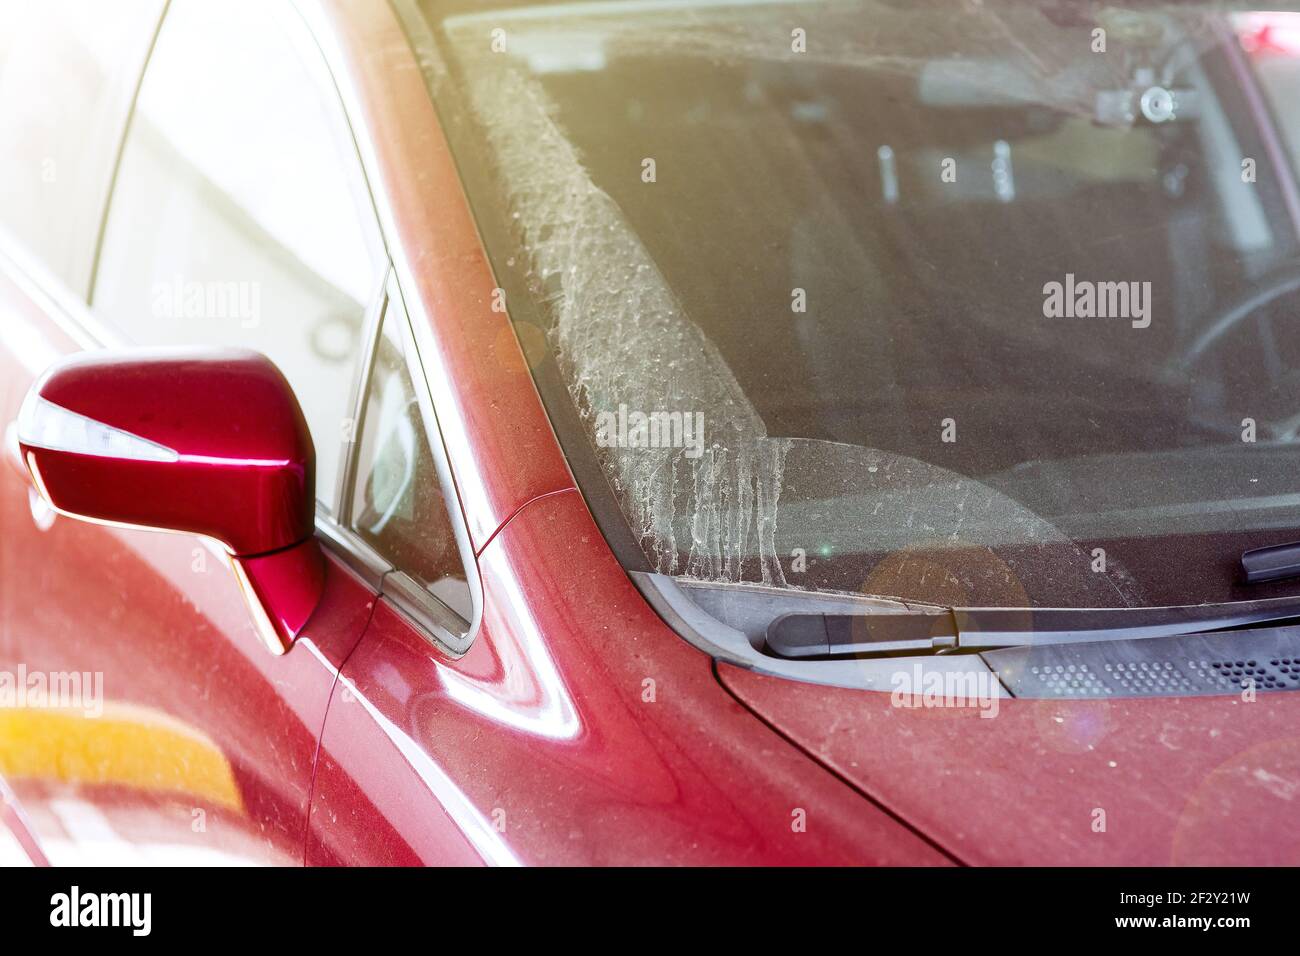 https://c8.alamy.com/comp/2F2Y21W/rear-view-mirror-exterior-outside-covered-with-a-layer-of-dust-closeup-of-a-dry-dirty-red-car-with-rubber-blades-on-wipers-of-windscreen-nobody-2F2Y21W.jpg